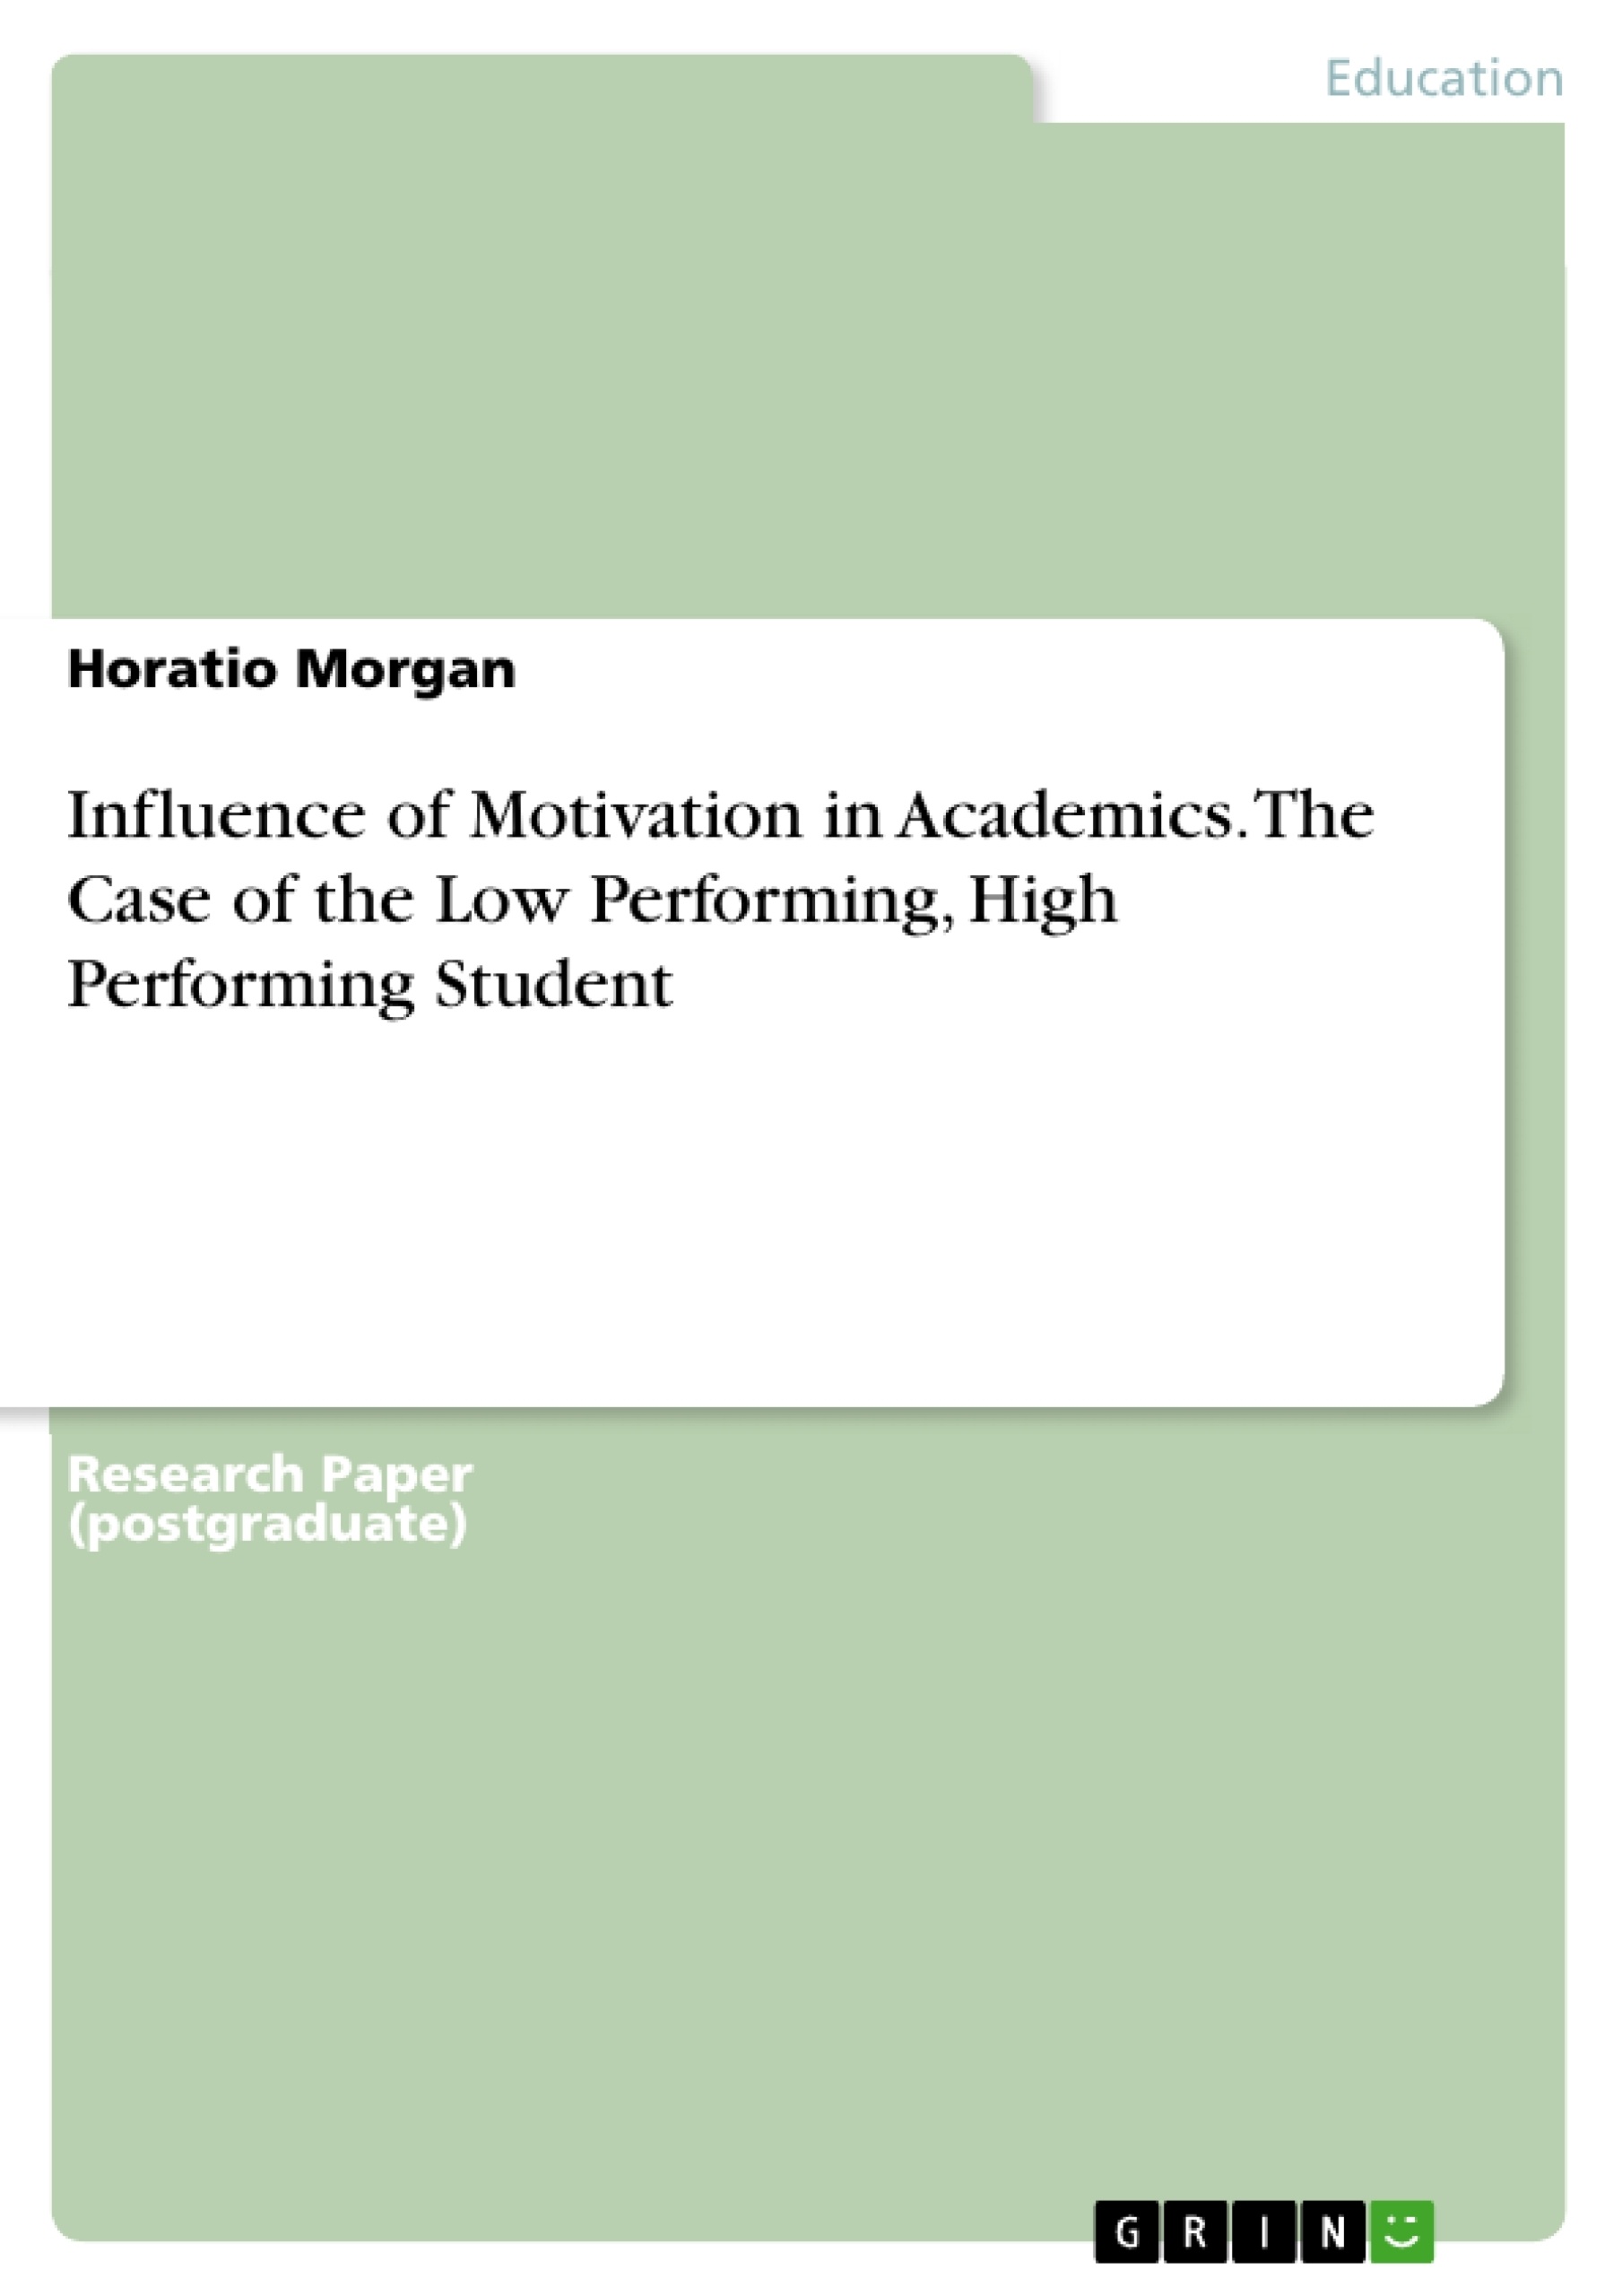 Título: Influence of Motivation in Academics. The Case of the Low Performing, High Performing Student